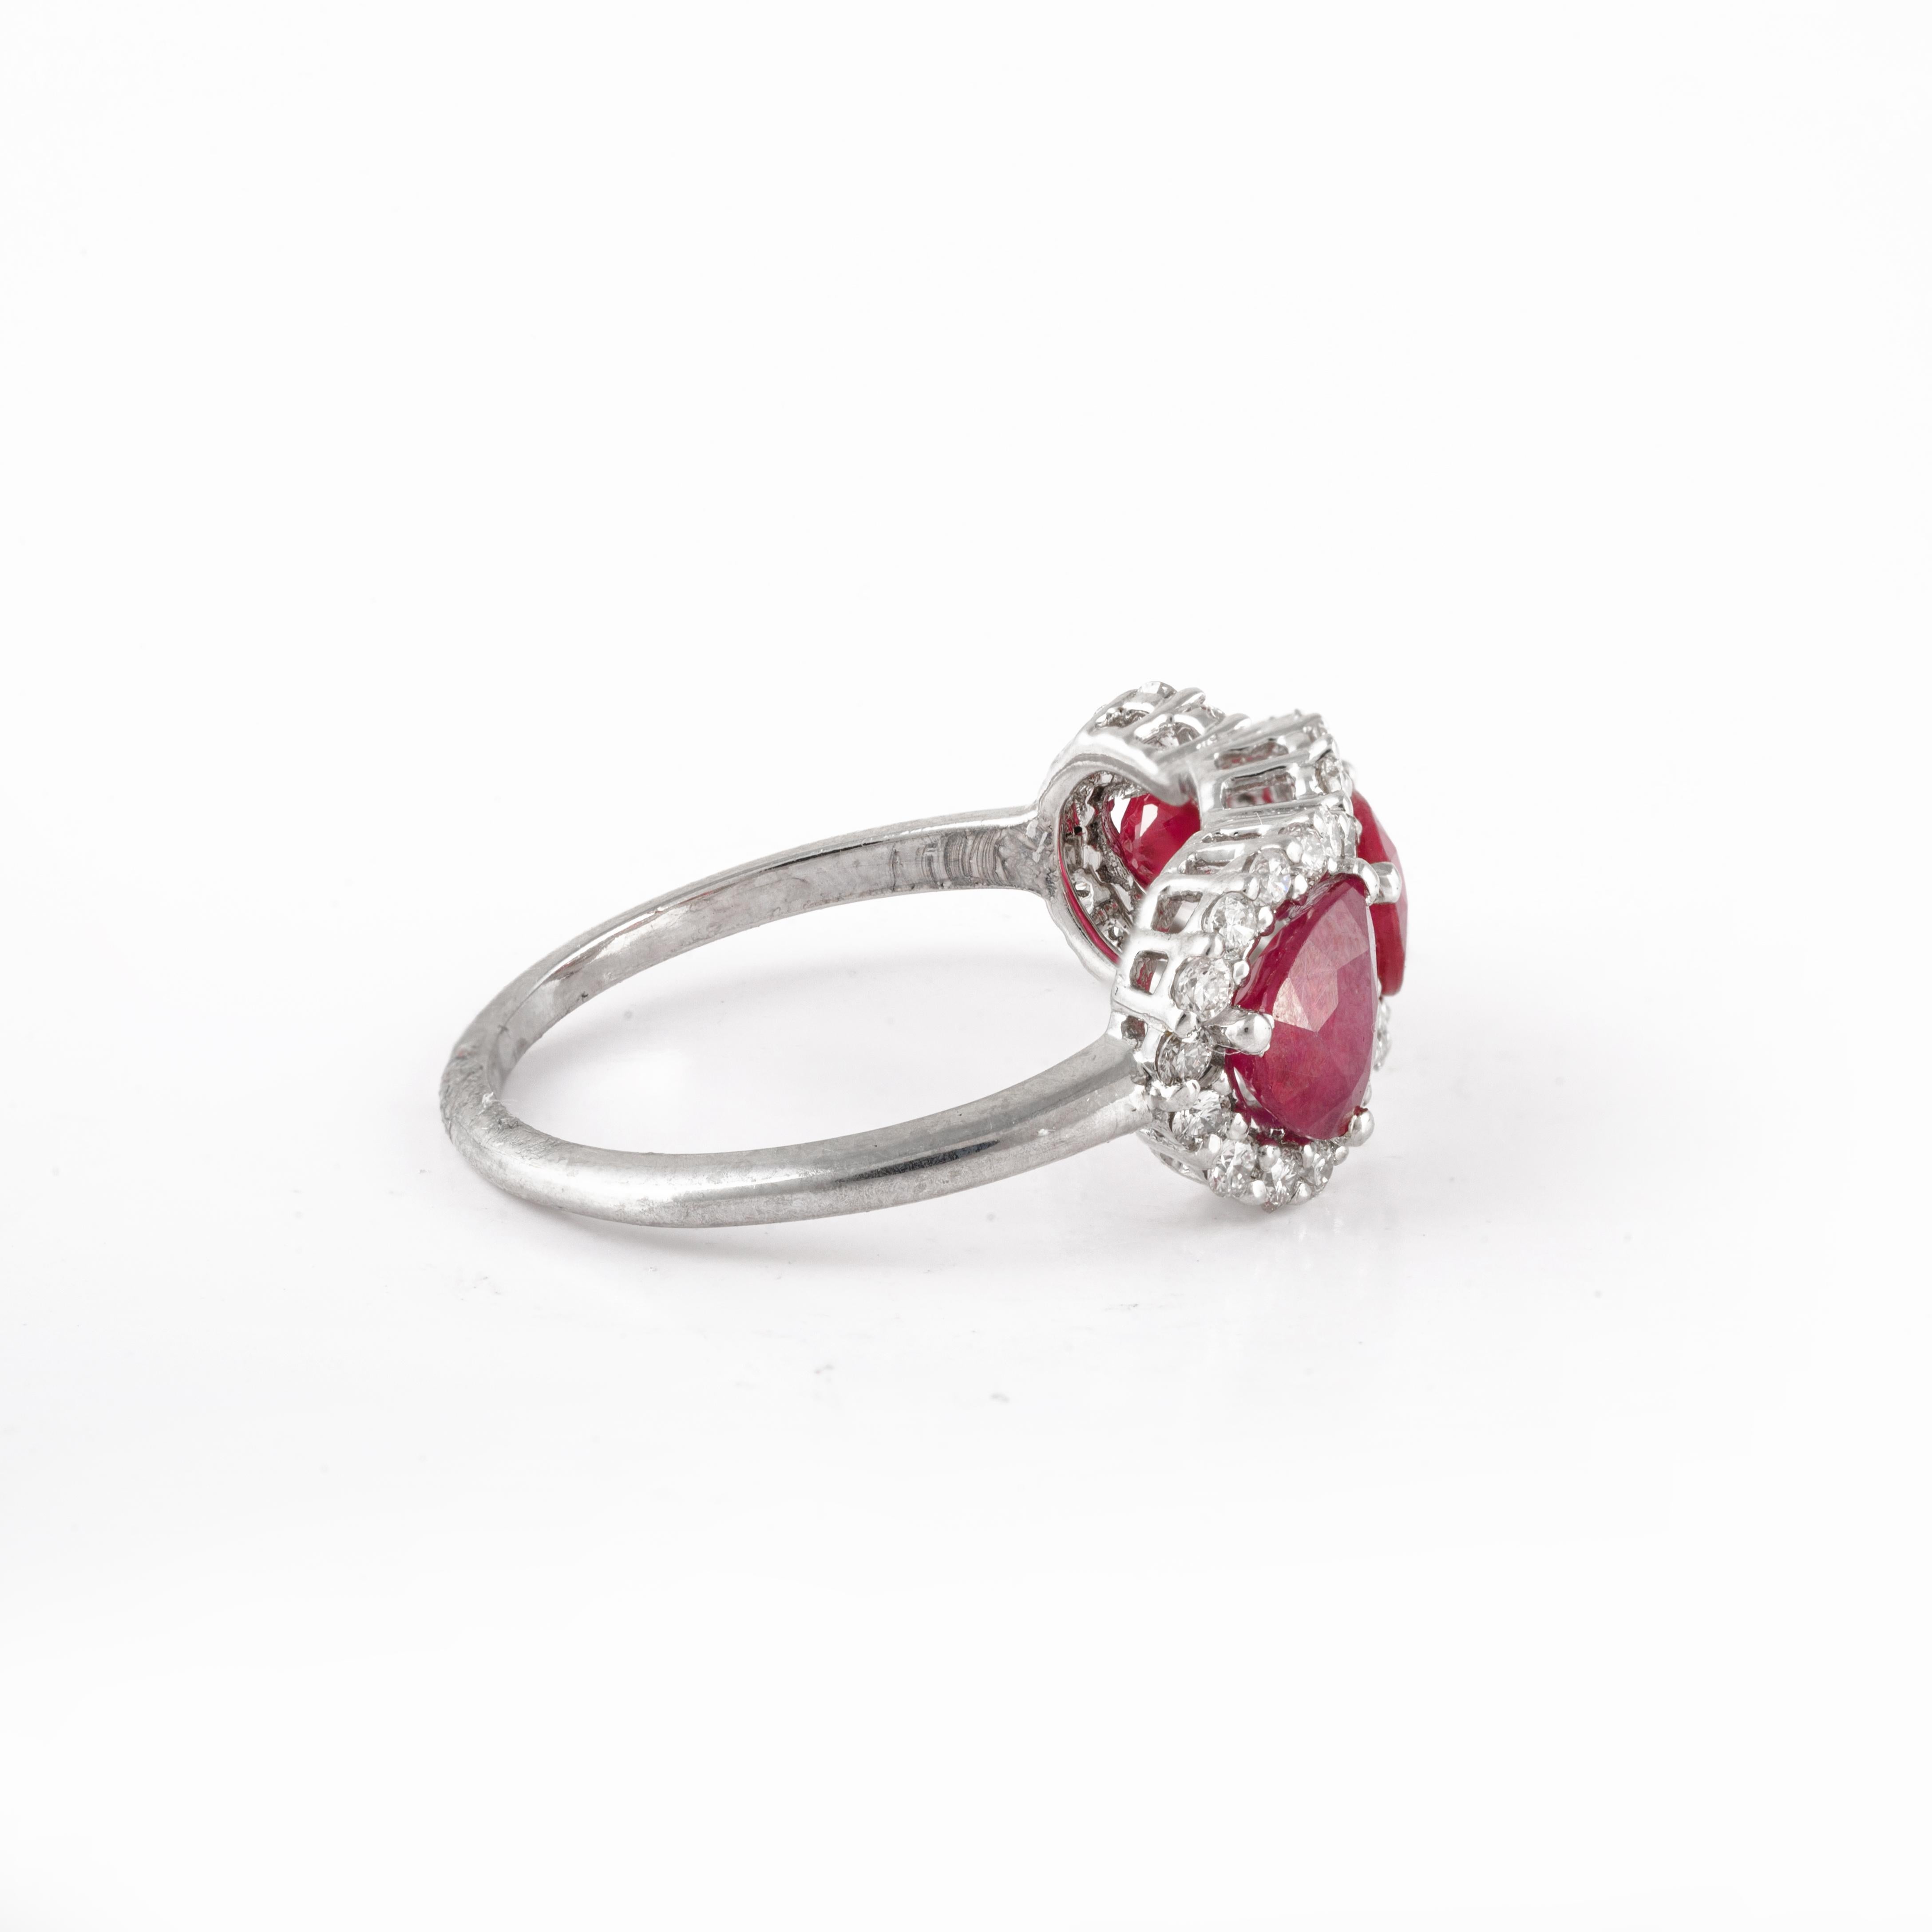 For Sale:  Three Stone Real Ruby Engagement Ring in 18k Solid White Gold with Diamonds 4